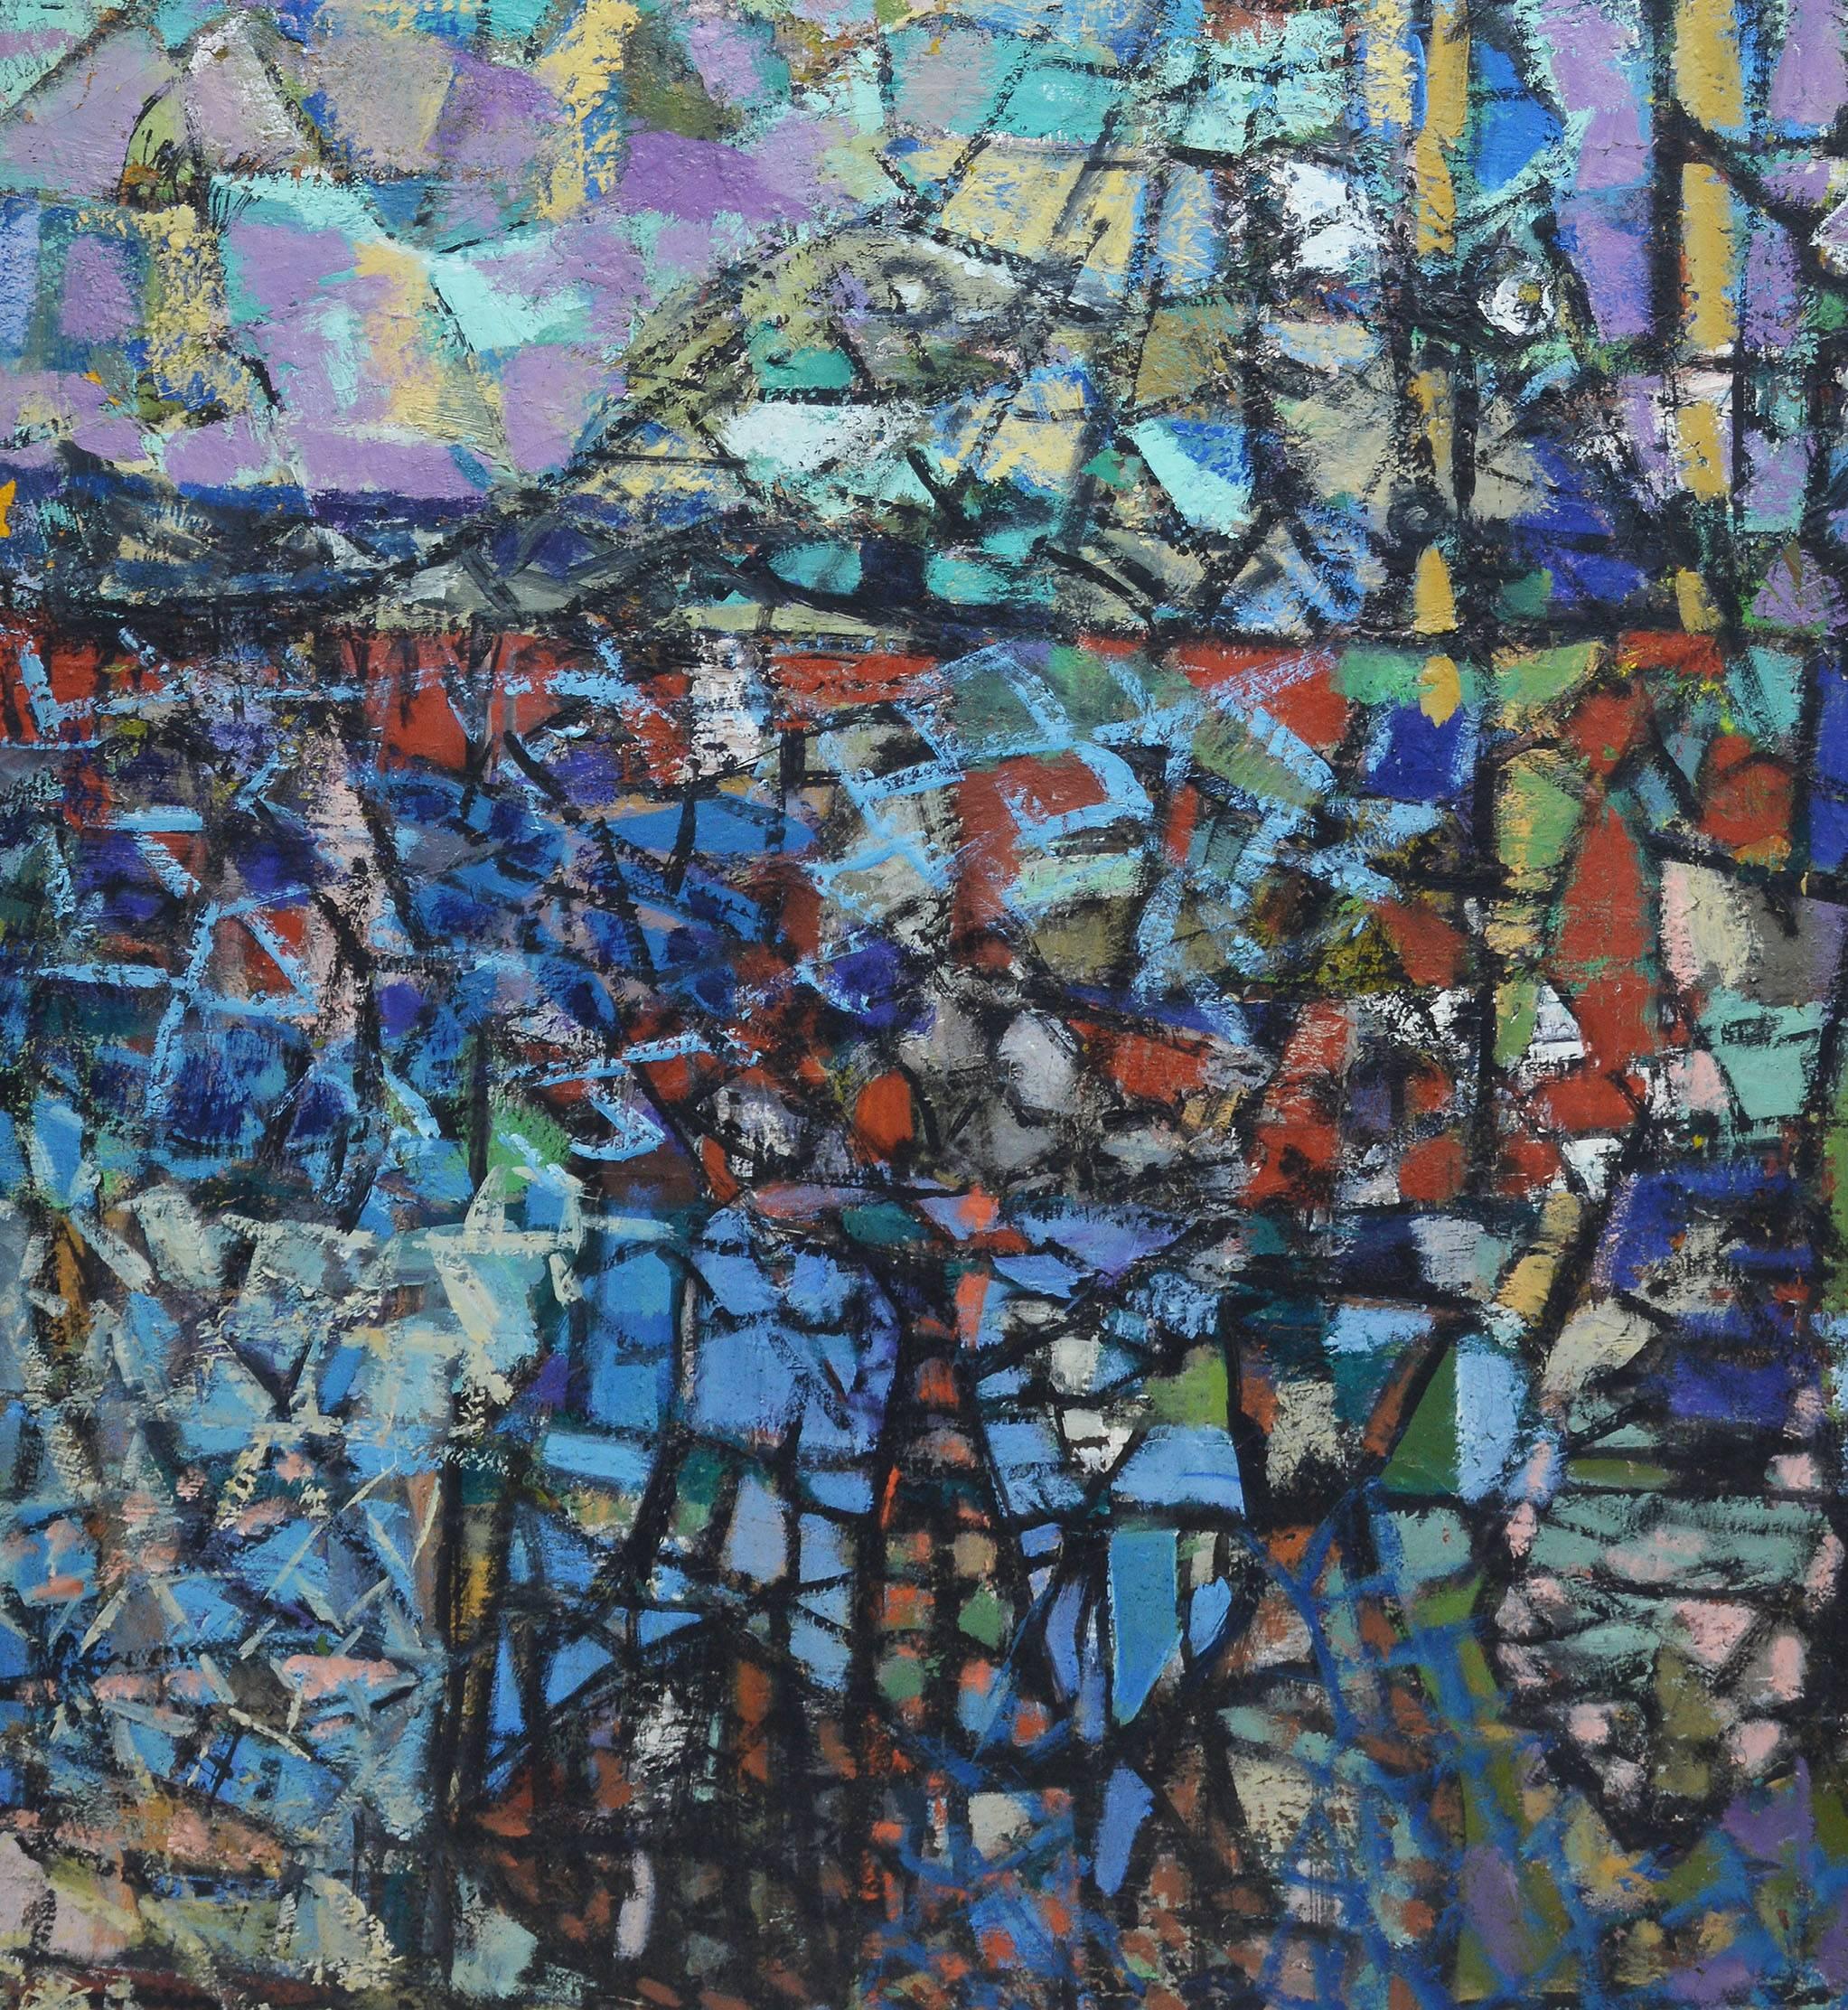 Modernist abstract harbor view painting.  Oil on canvas, circa 1940.  Unsigned.  Image size, 24"L x 36"H.